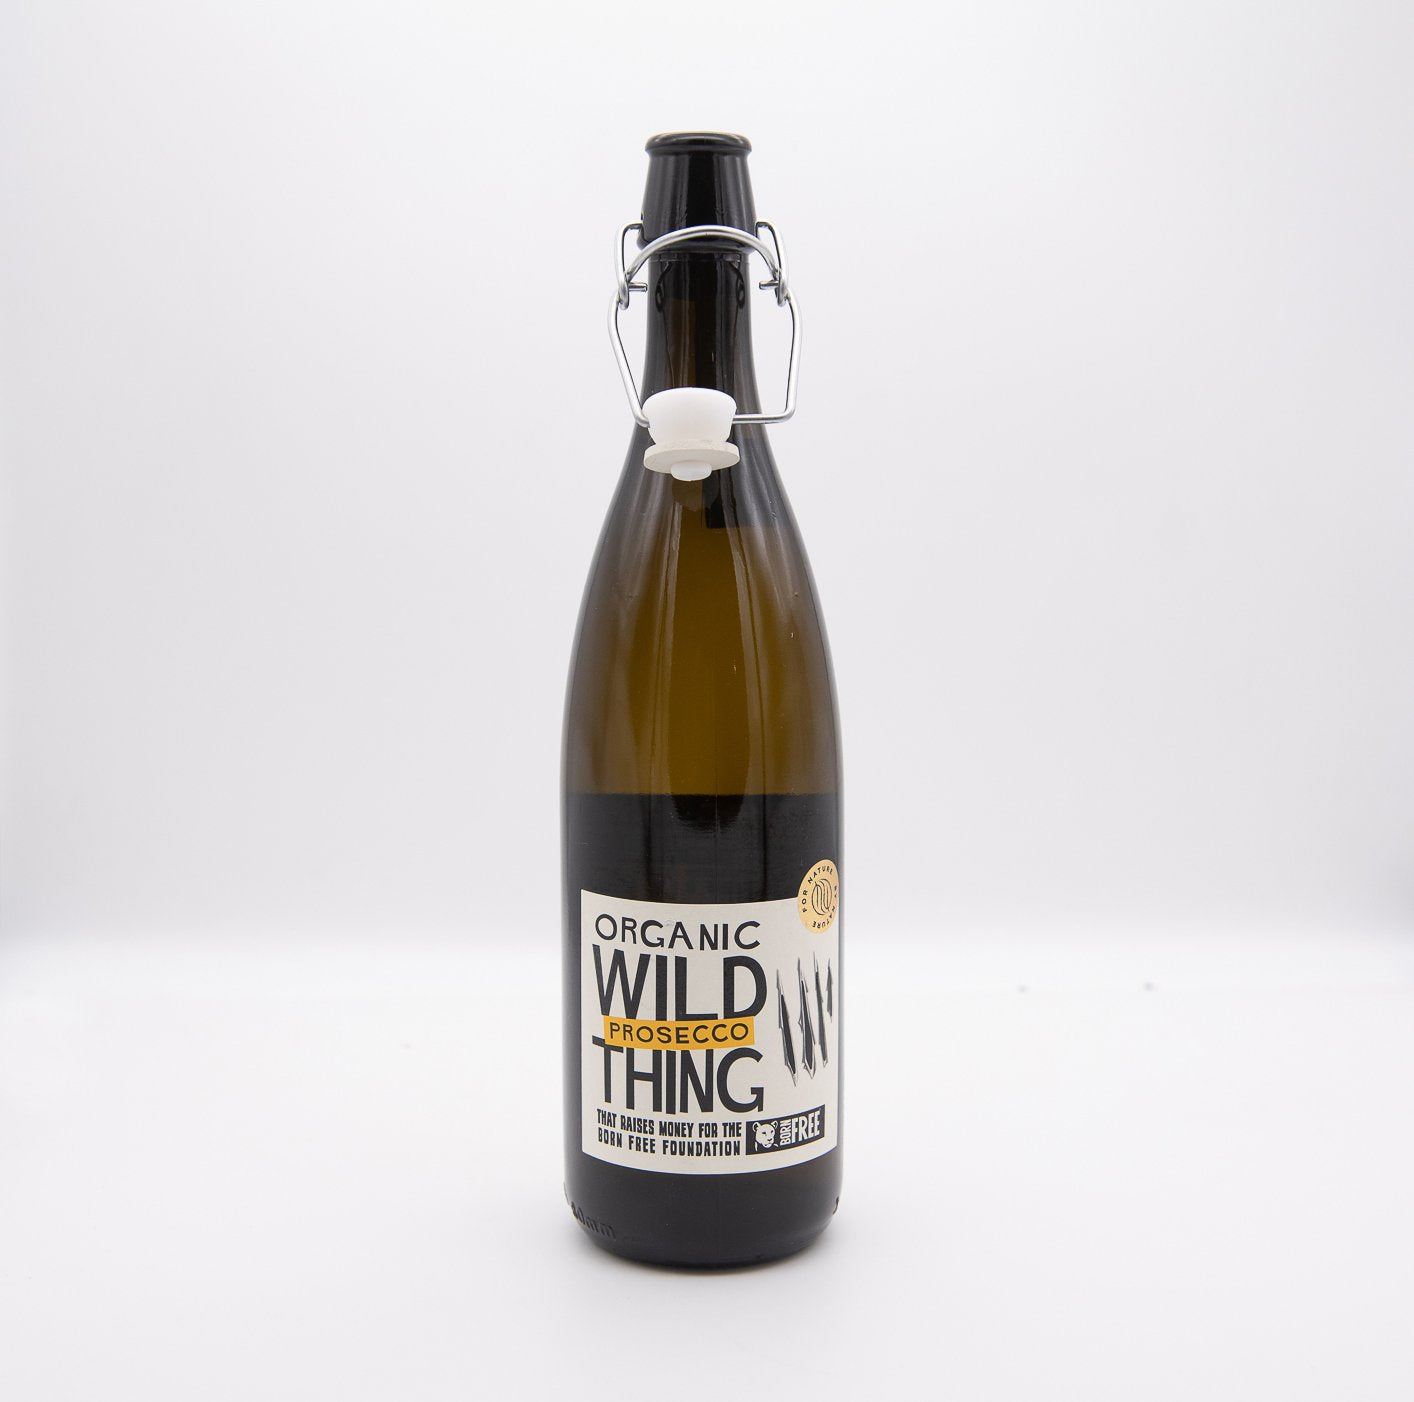 Wild Thing Prosecco